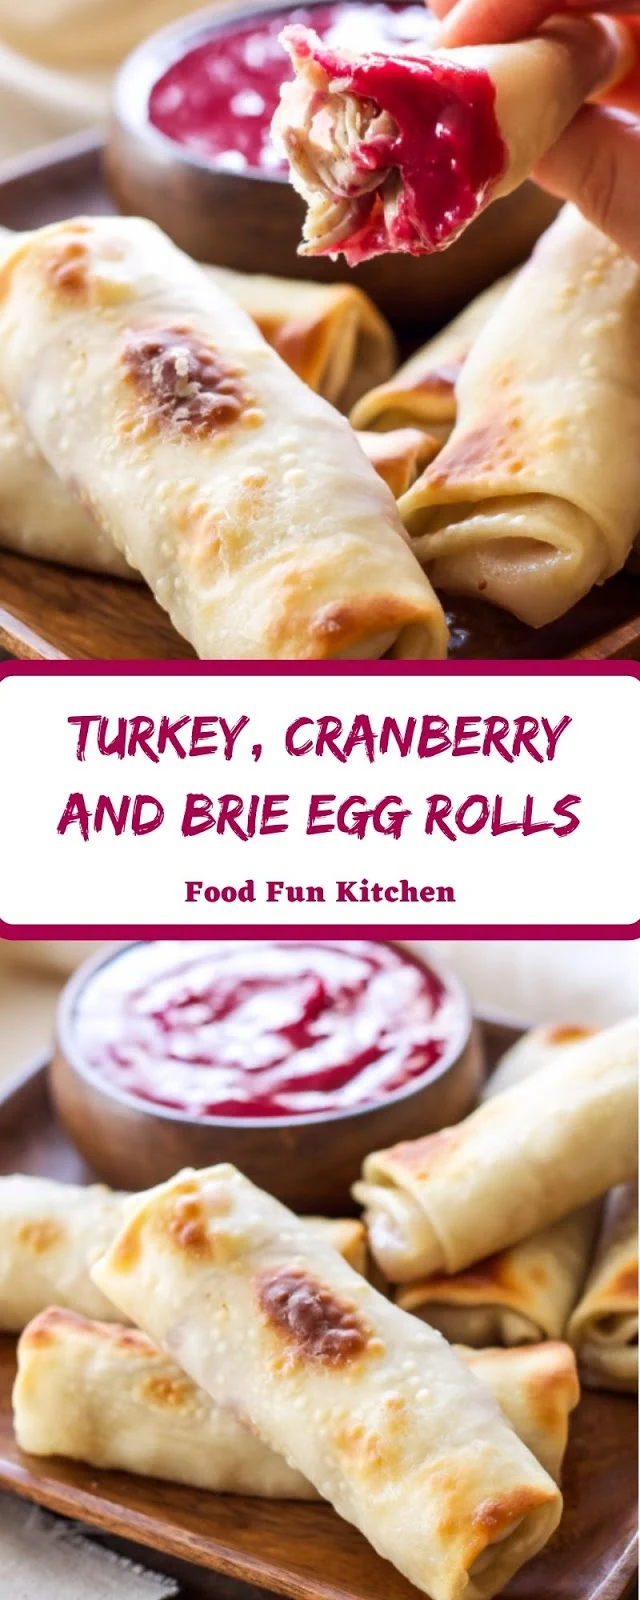 TURKEY, CRANBERRY AND BRIE EGG ROLLS